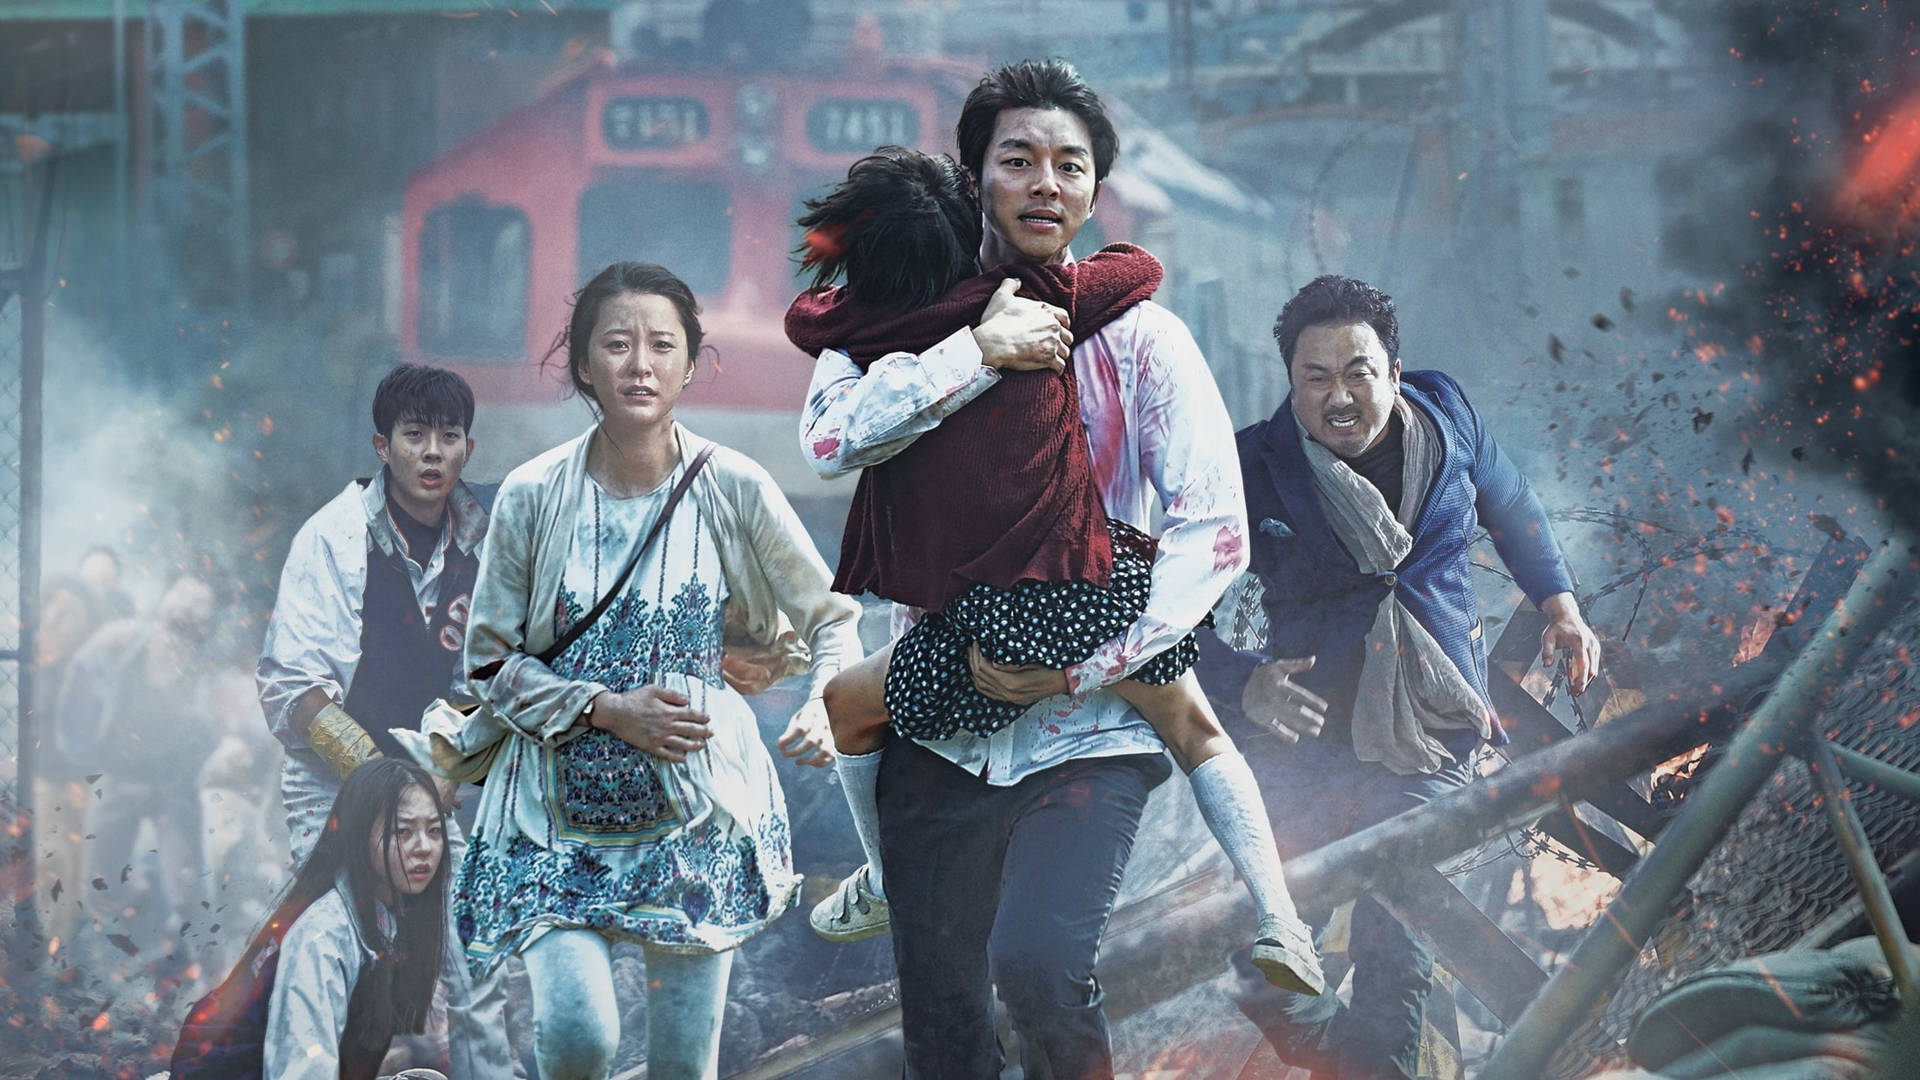 The Iconic Movie Scene From Train To Busan, Featuring A Thrilling Zombie Chase. Background